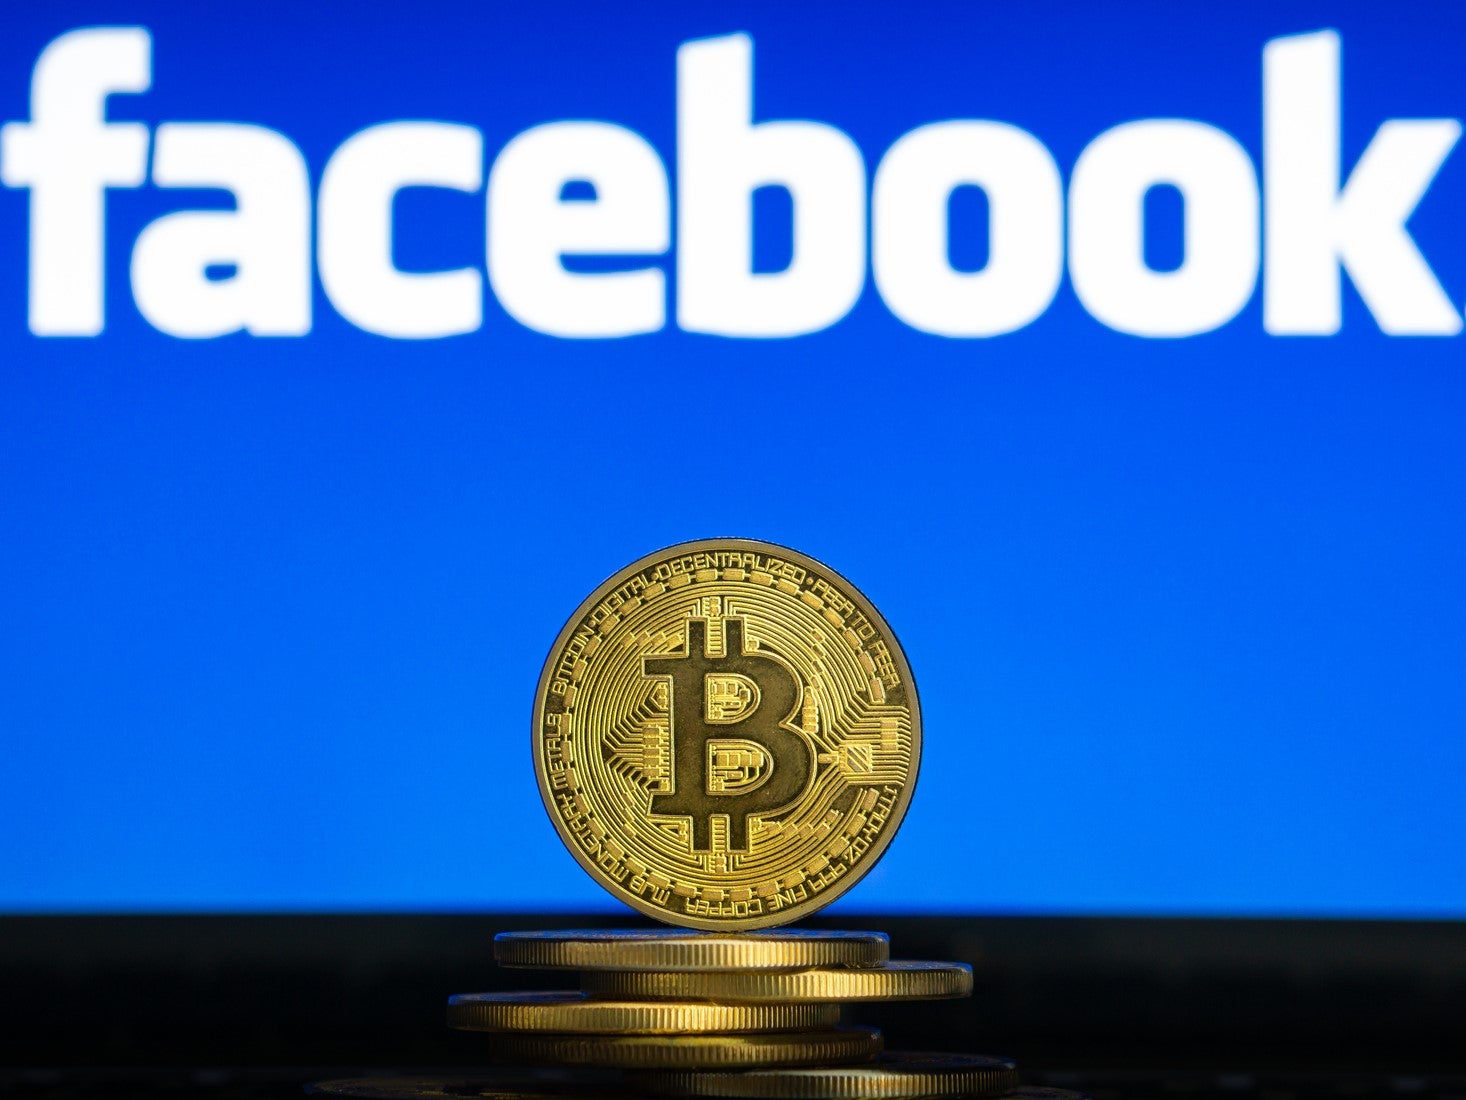 Bitcoin’s market capitalisation is now more valuable than Facebook’s